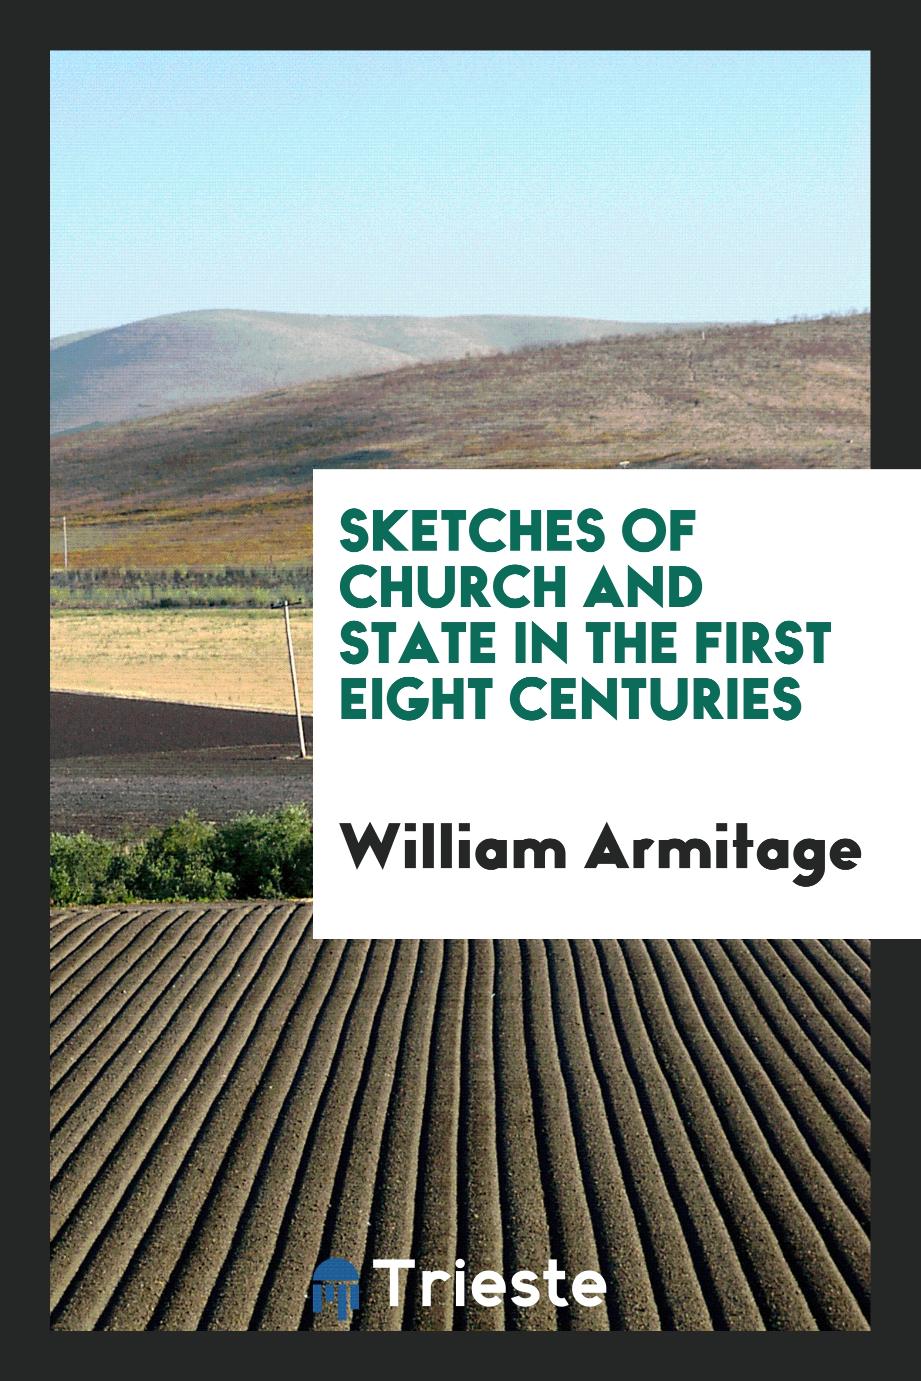 Sketches of church and state in the first eight centuries